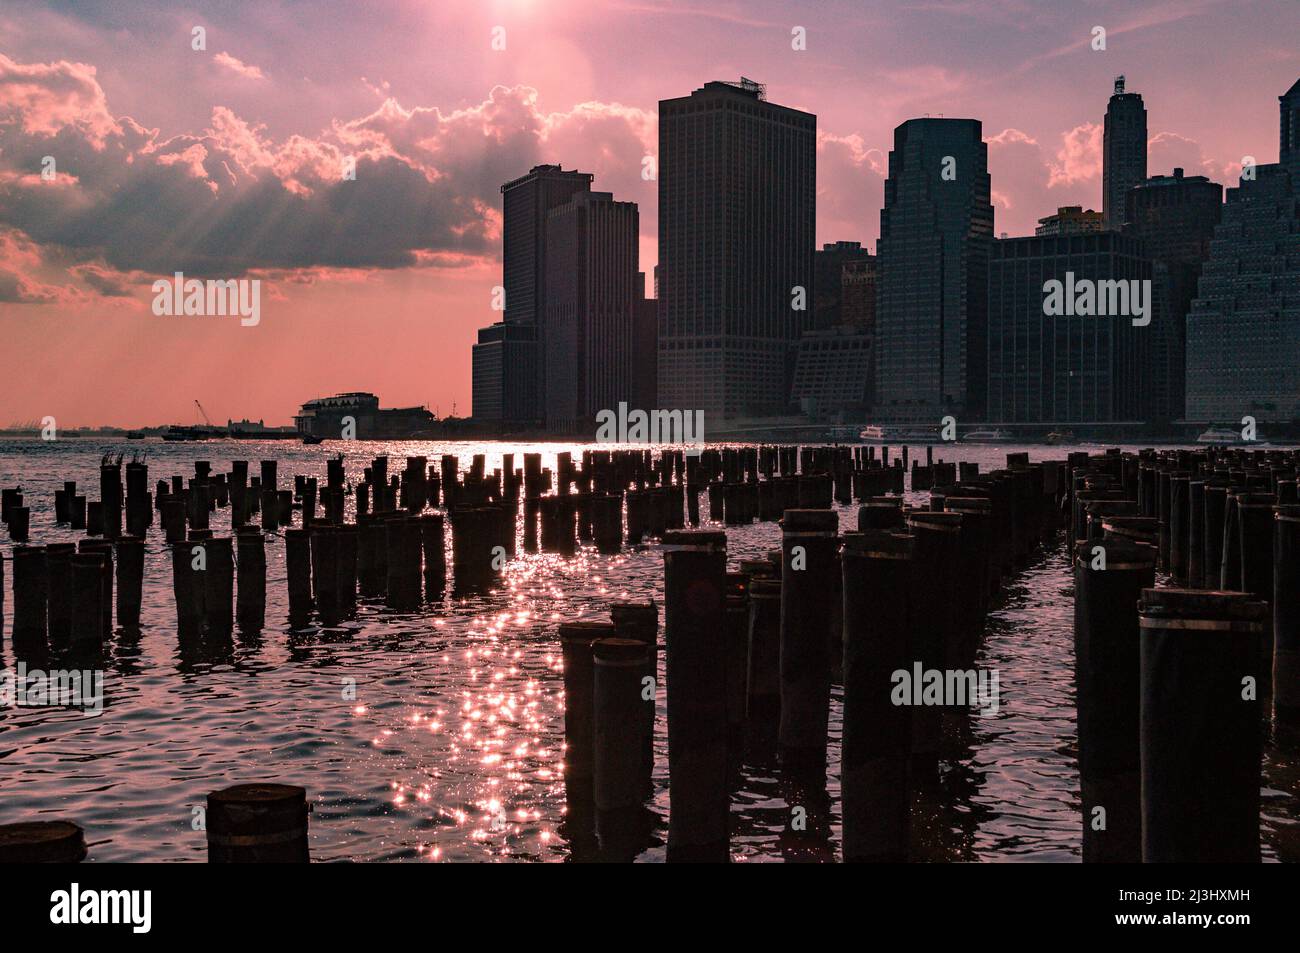 Brooklyn Heights, New York City, NY, USA, Wooden Pillars in East river and the skyline of lower Manhattan seen from the old Pier 1 at Brooklyn Bridge Park Stock Photo